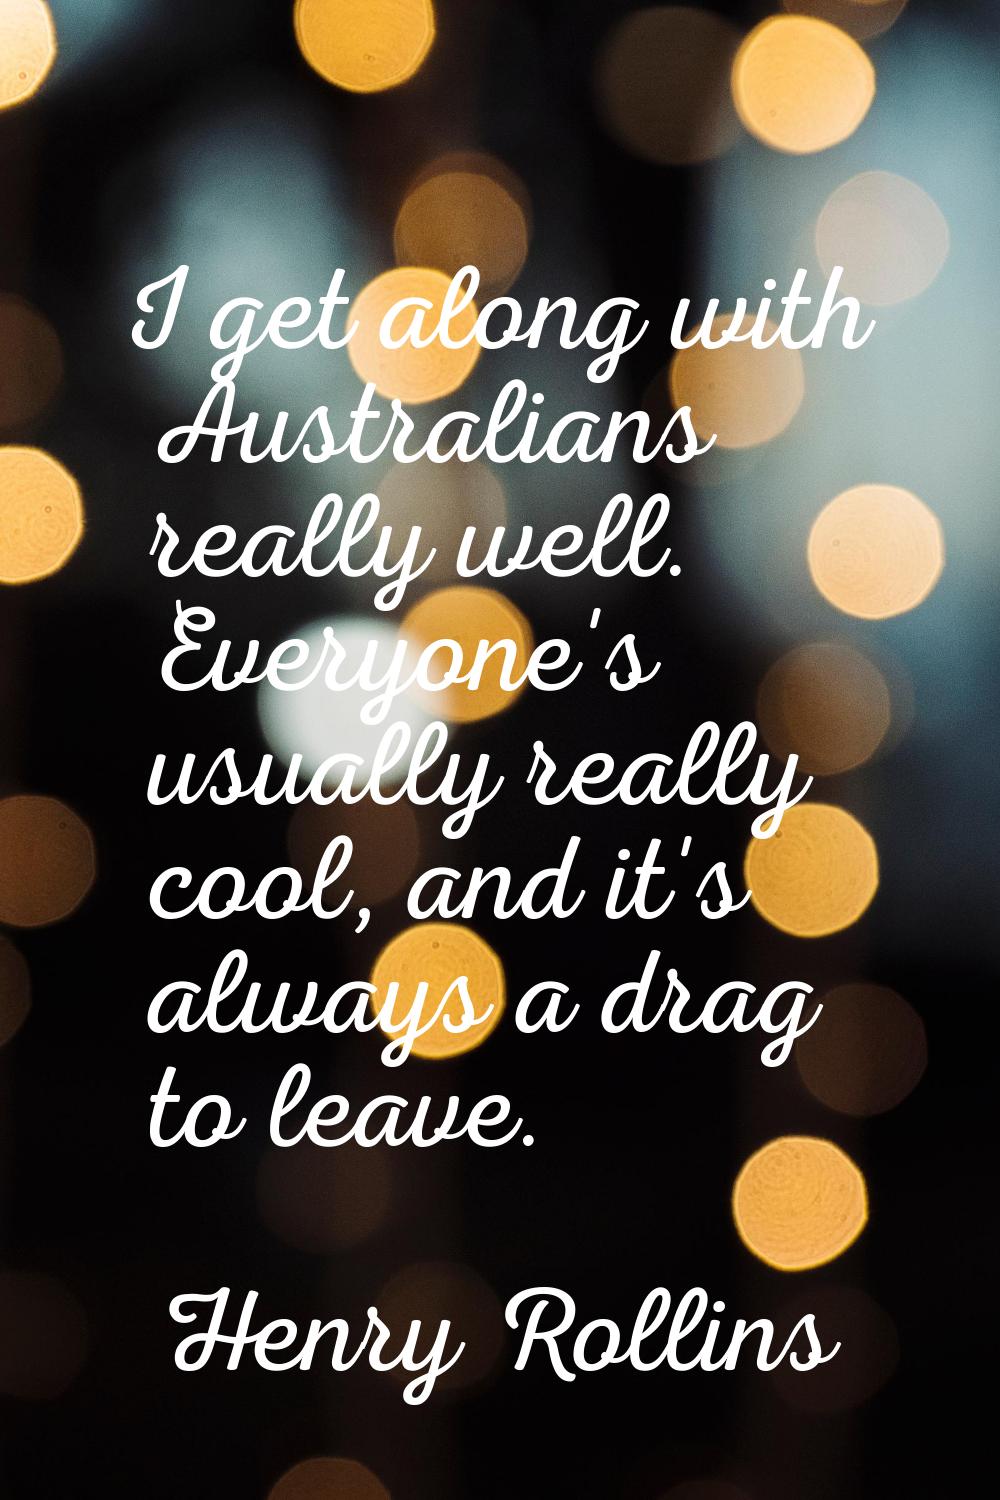 I get along with Australians really well. Everyone's usually really cool, and it's always a drag to